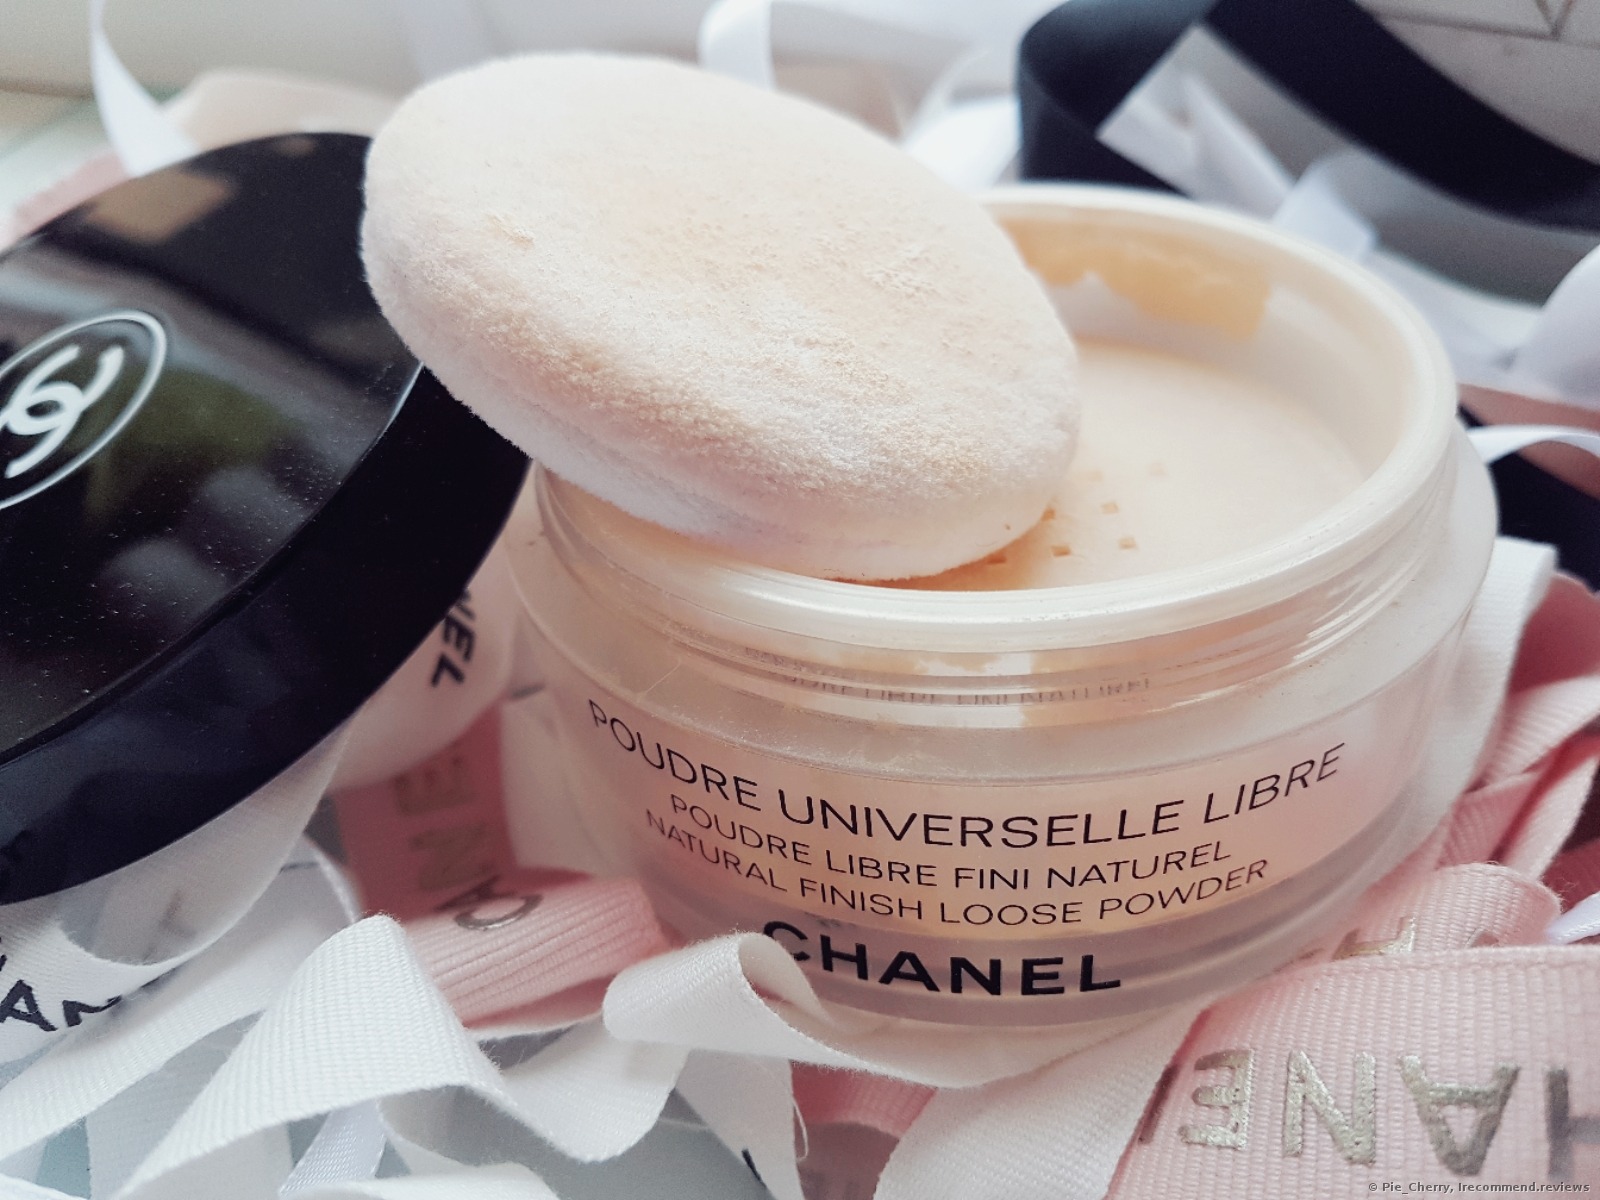 Chanel Poudre Universelle Libre Natural Finish Loose Powder «Ideal… It's hard to fault. Photos of the product on my skin are HERE!!!» | Consumer reviews